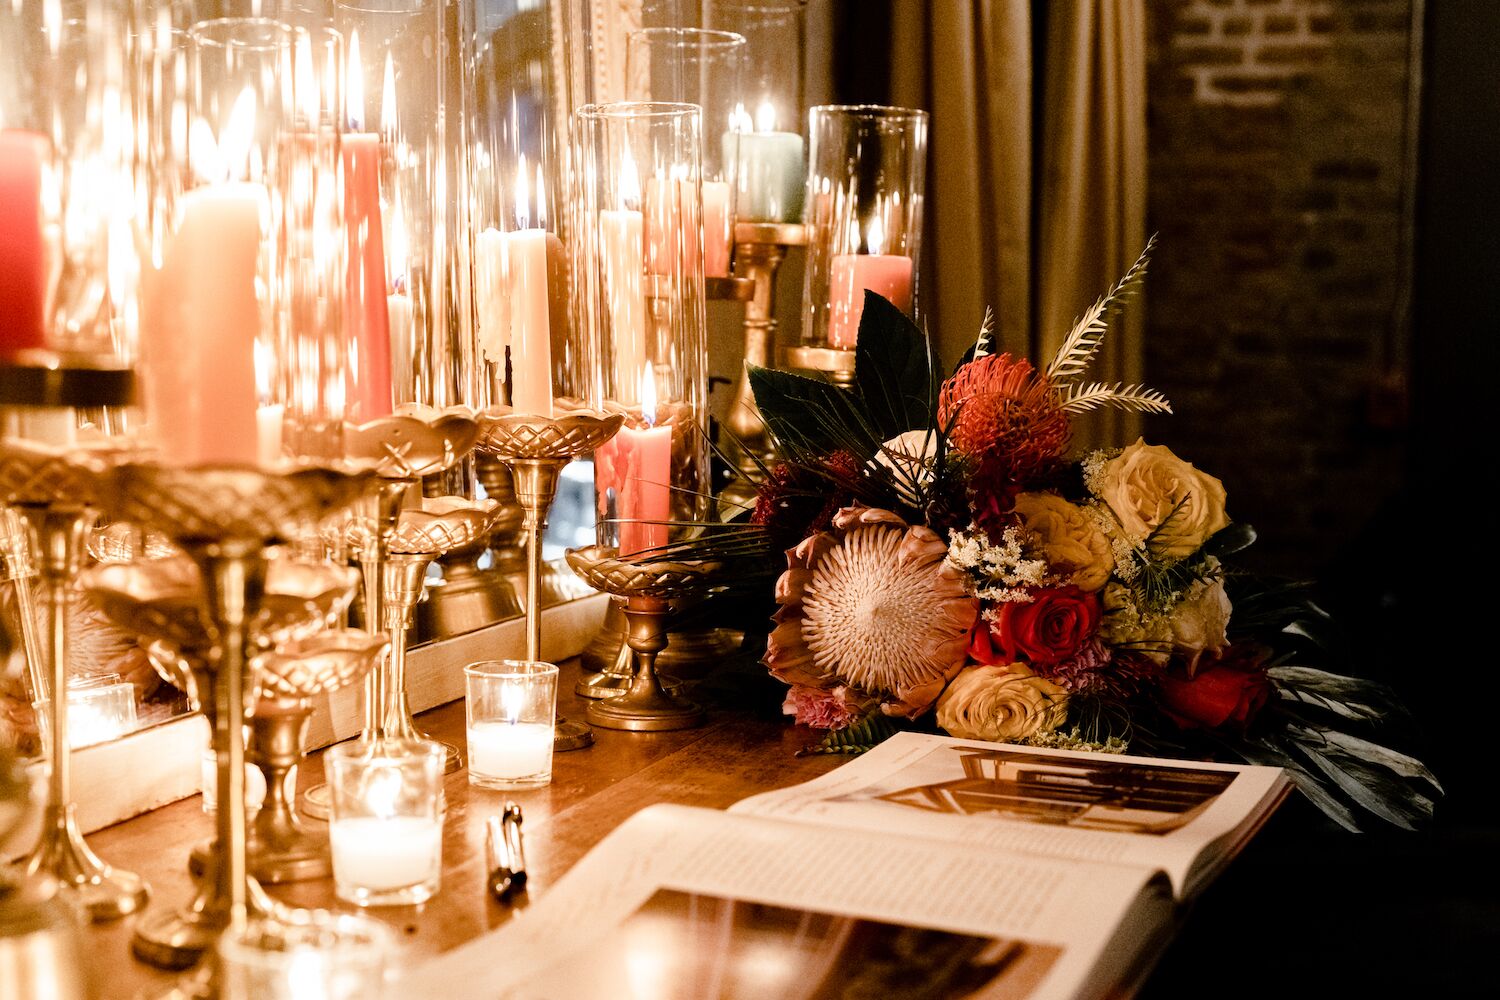 wedding guest book, lit candles, and floral display